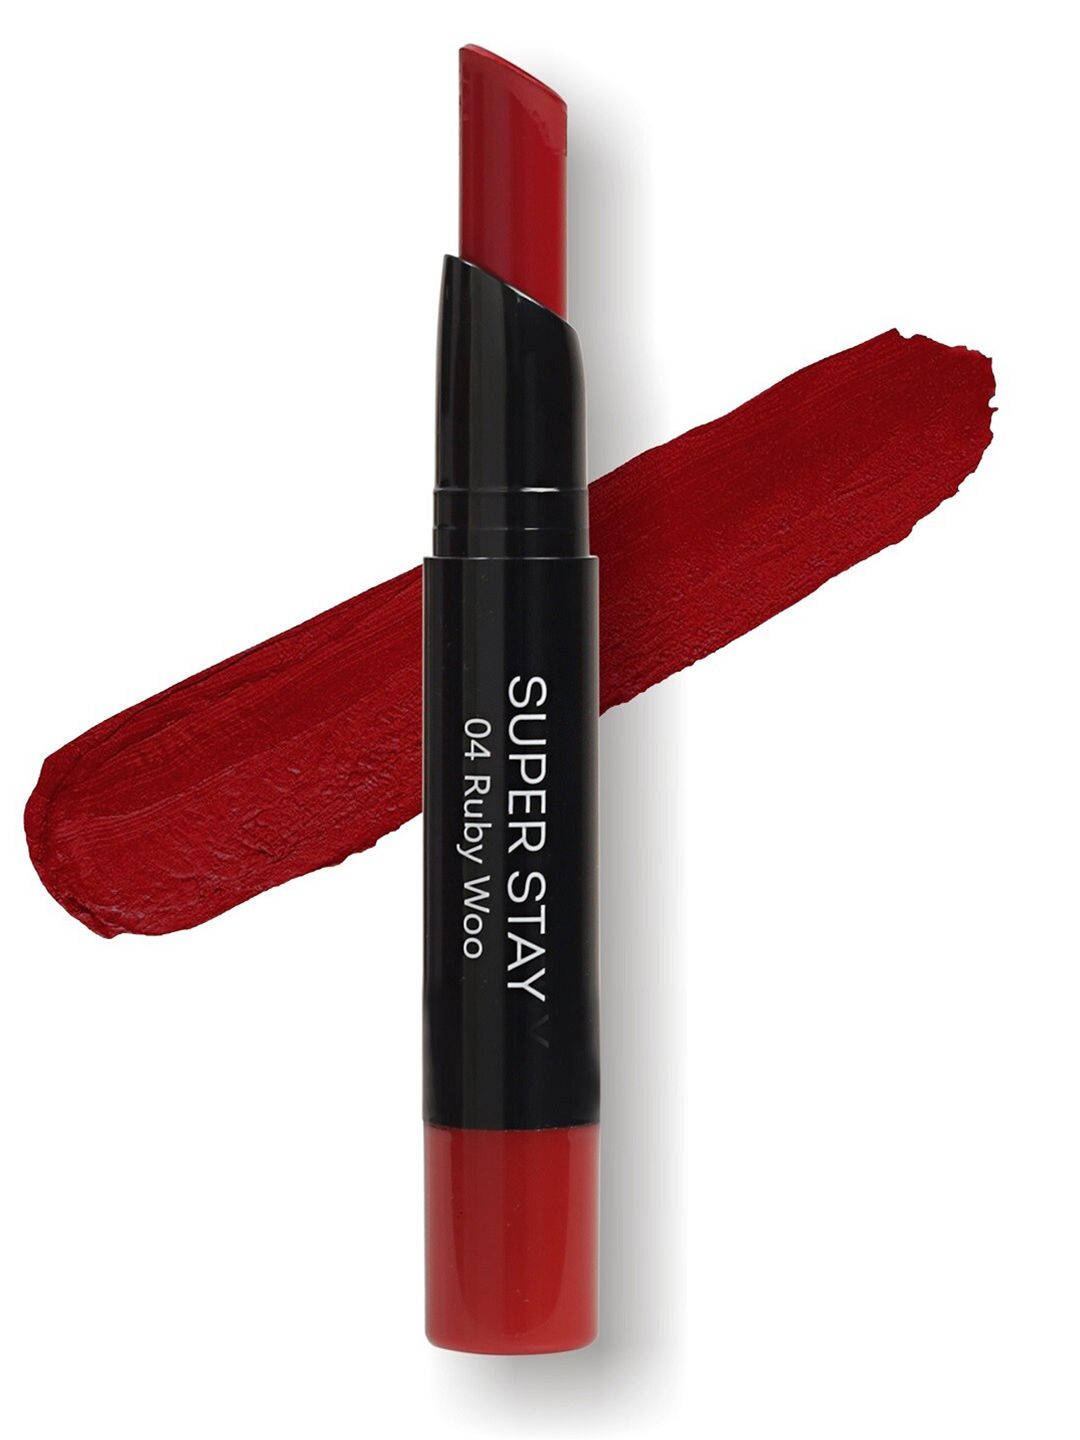 ME-ON Super Stay Matte Lipstick - Ruby Woo 04 Price in India